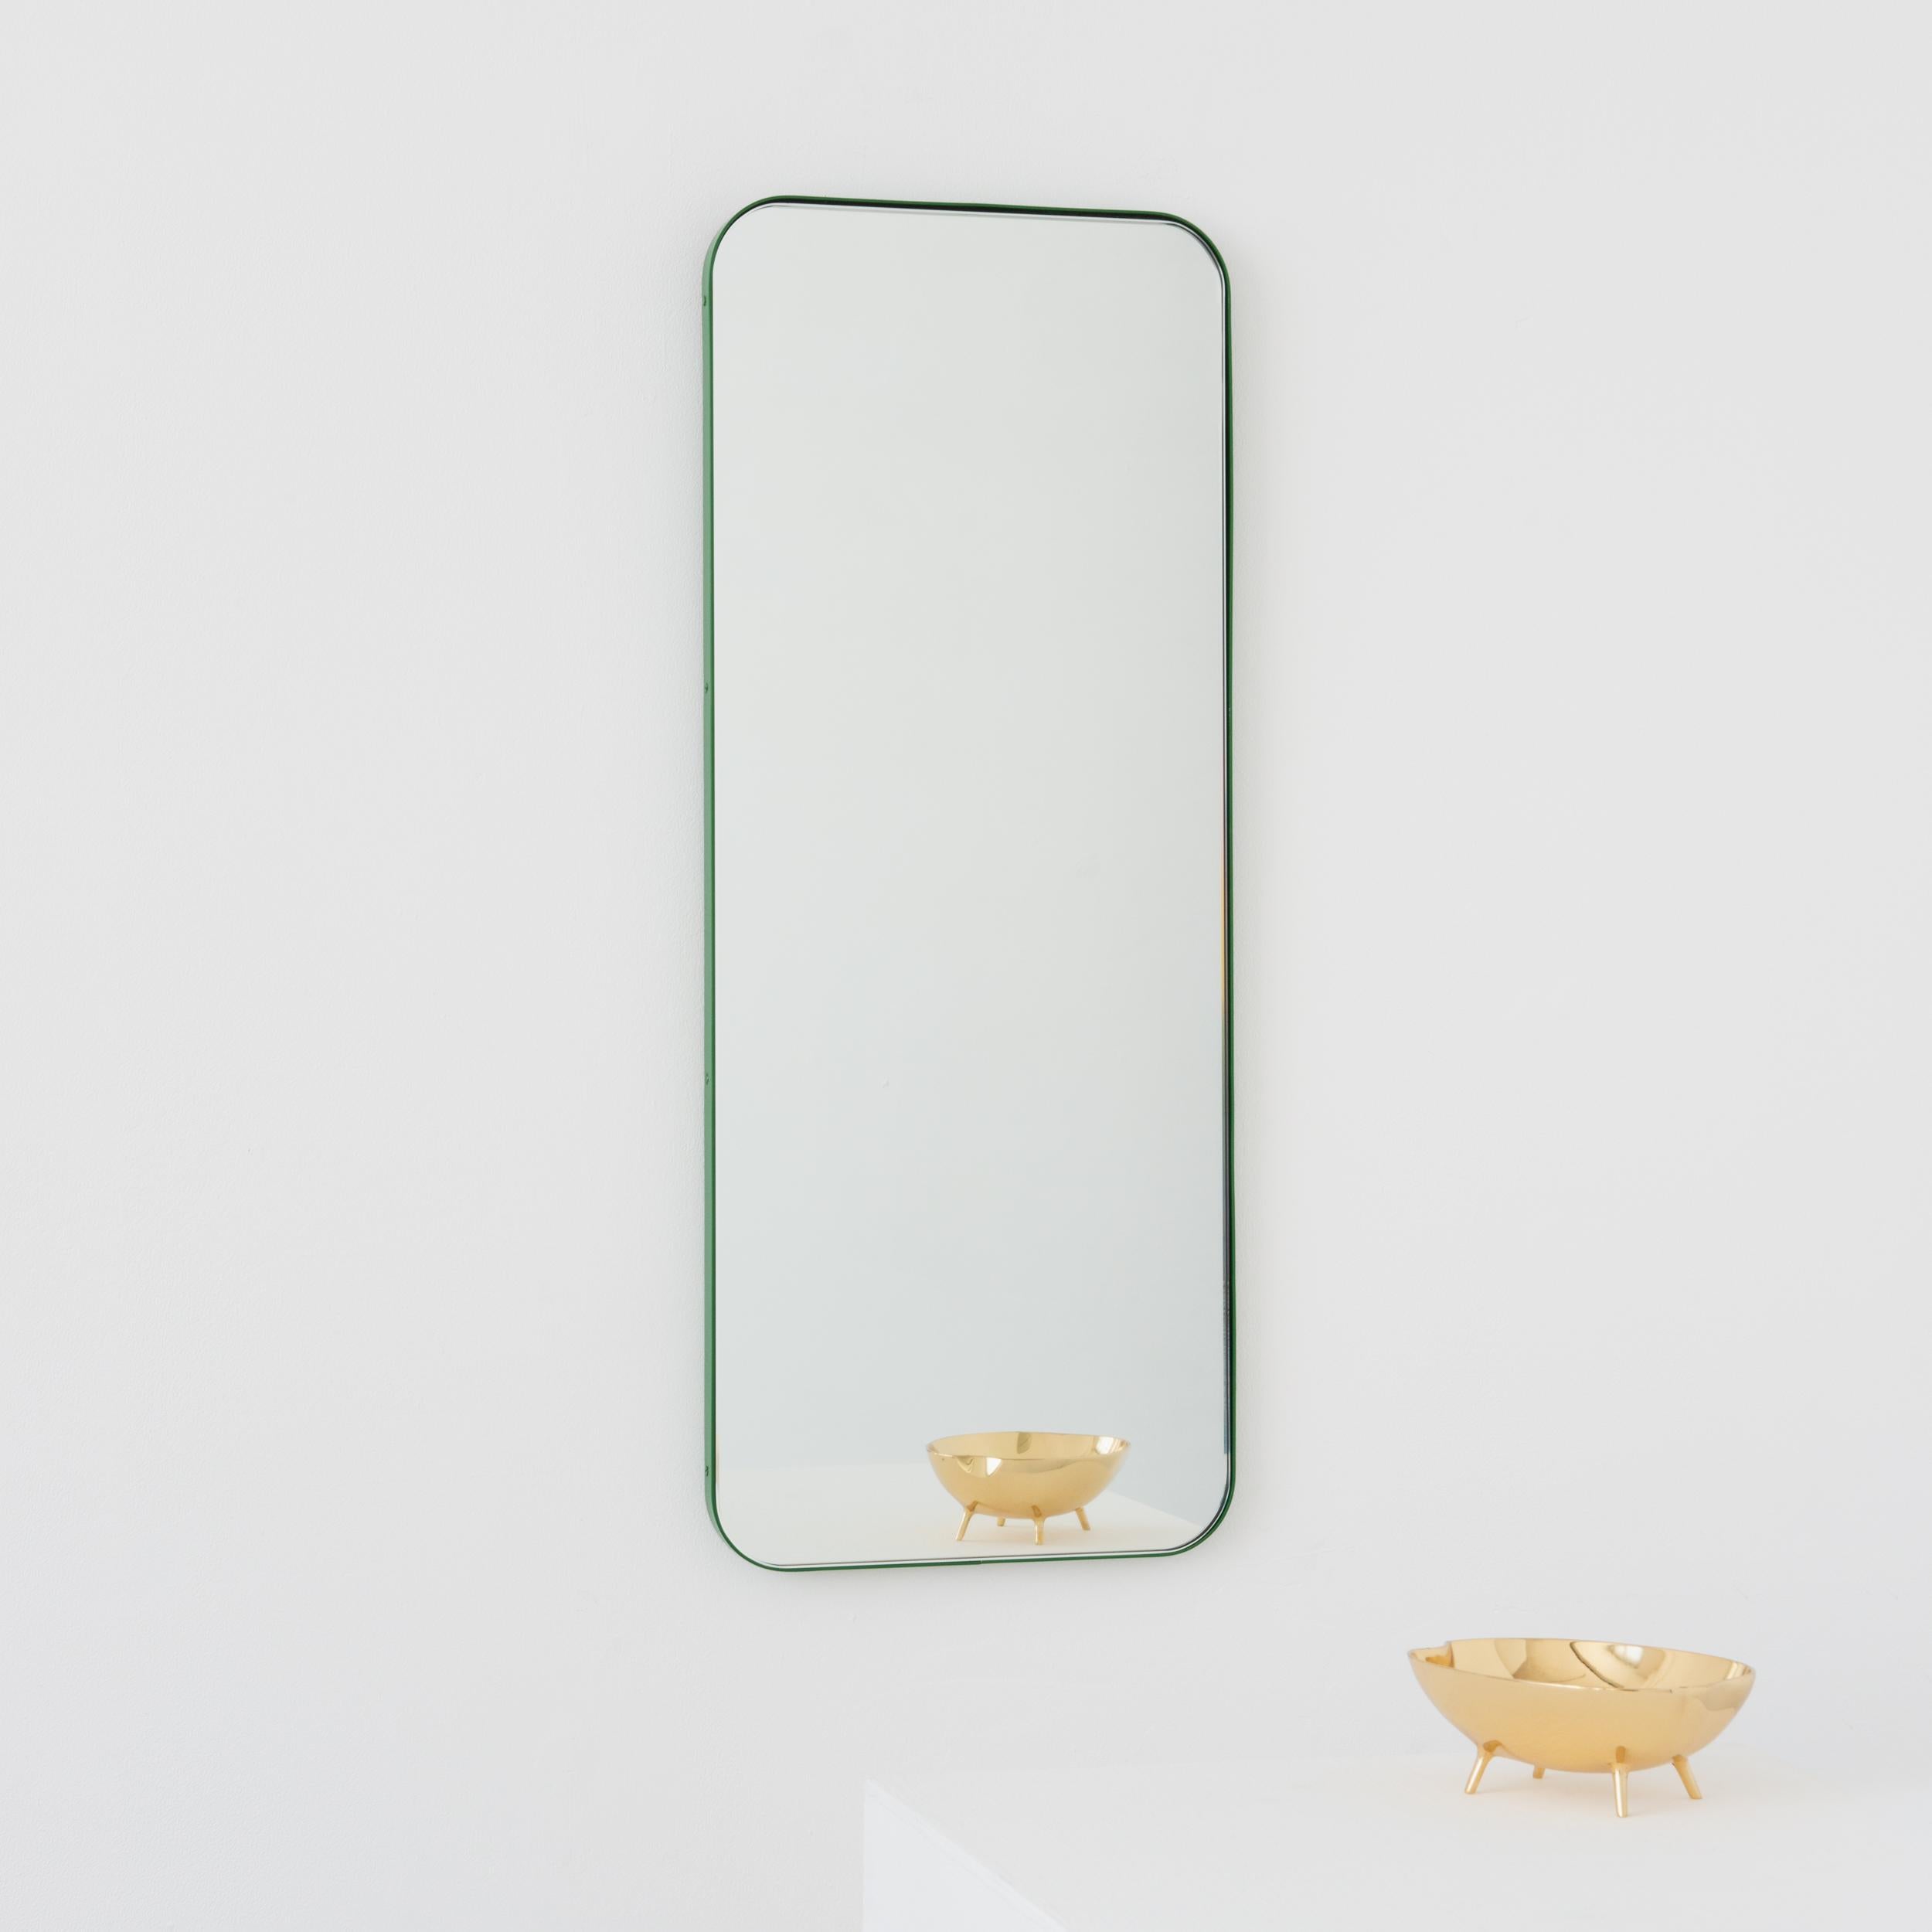 Modern rectangular mirror with an elegant green frame. Part of the charming Quadris collection, designed and handcrafted in London, UK. 

Supplied fitted with a specialist z-bar for an easy installation. A split batten hanging system to fit the